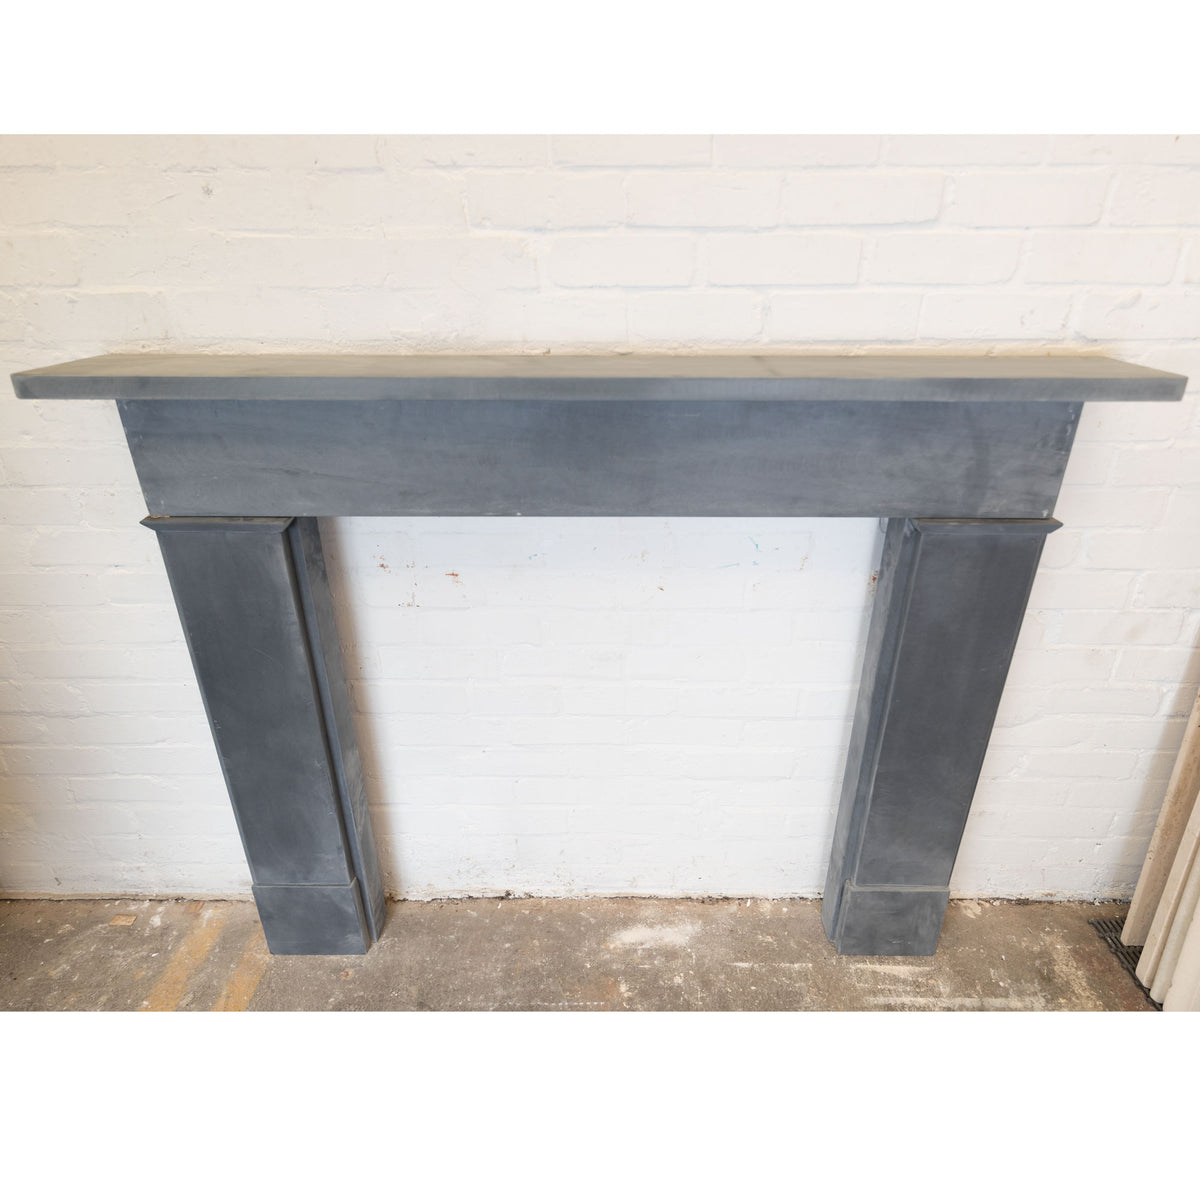 Late Georgian/Victorian Style Natural Slate Fireplace Surround | The Architectural Forum